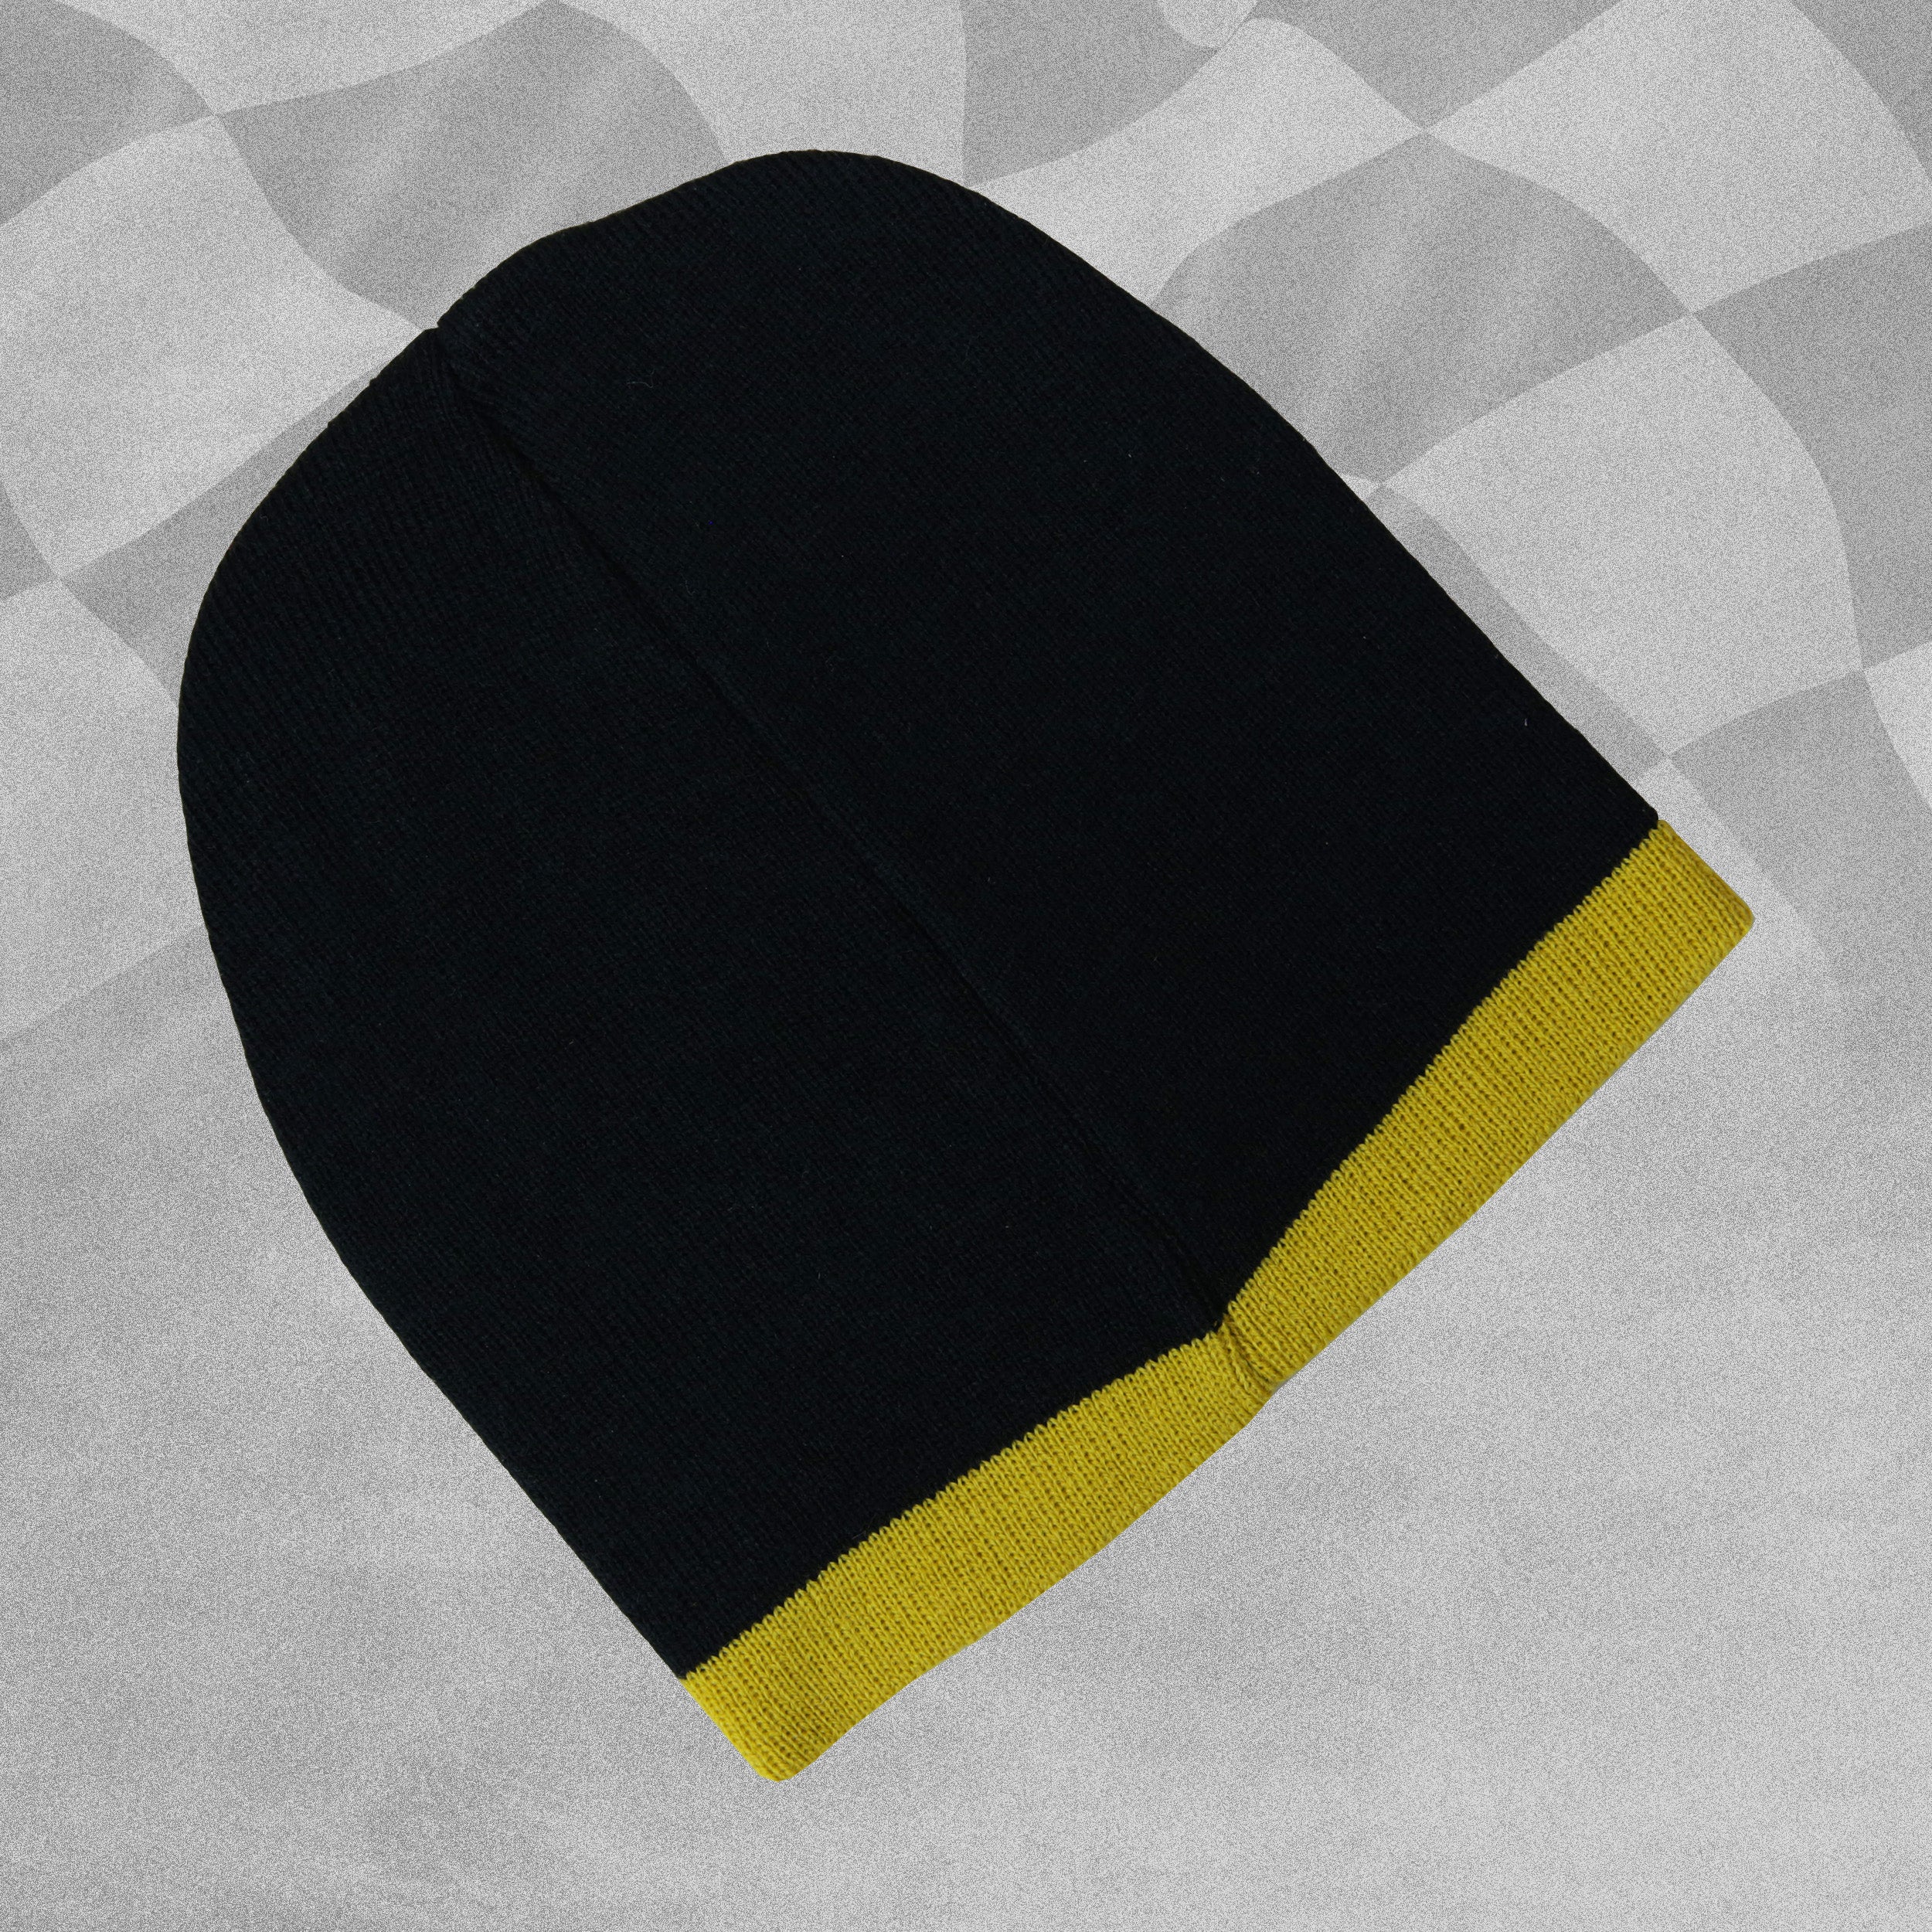 Isle of Man Road Races Black/Gold Knitted Beanie Hat